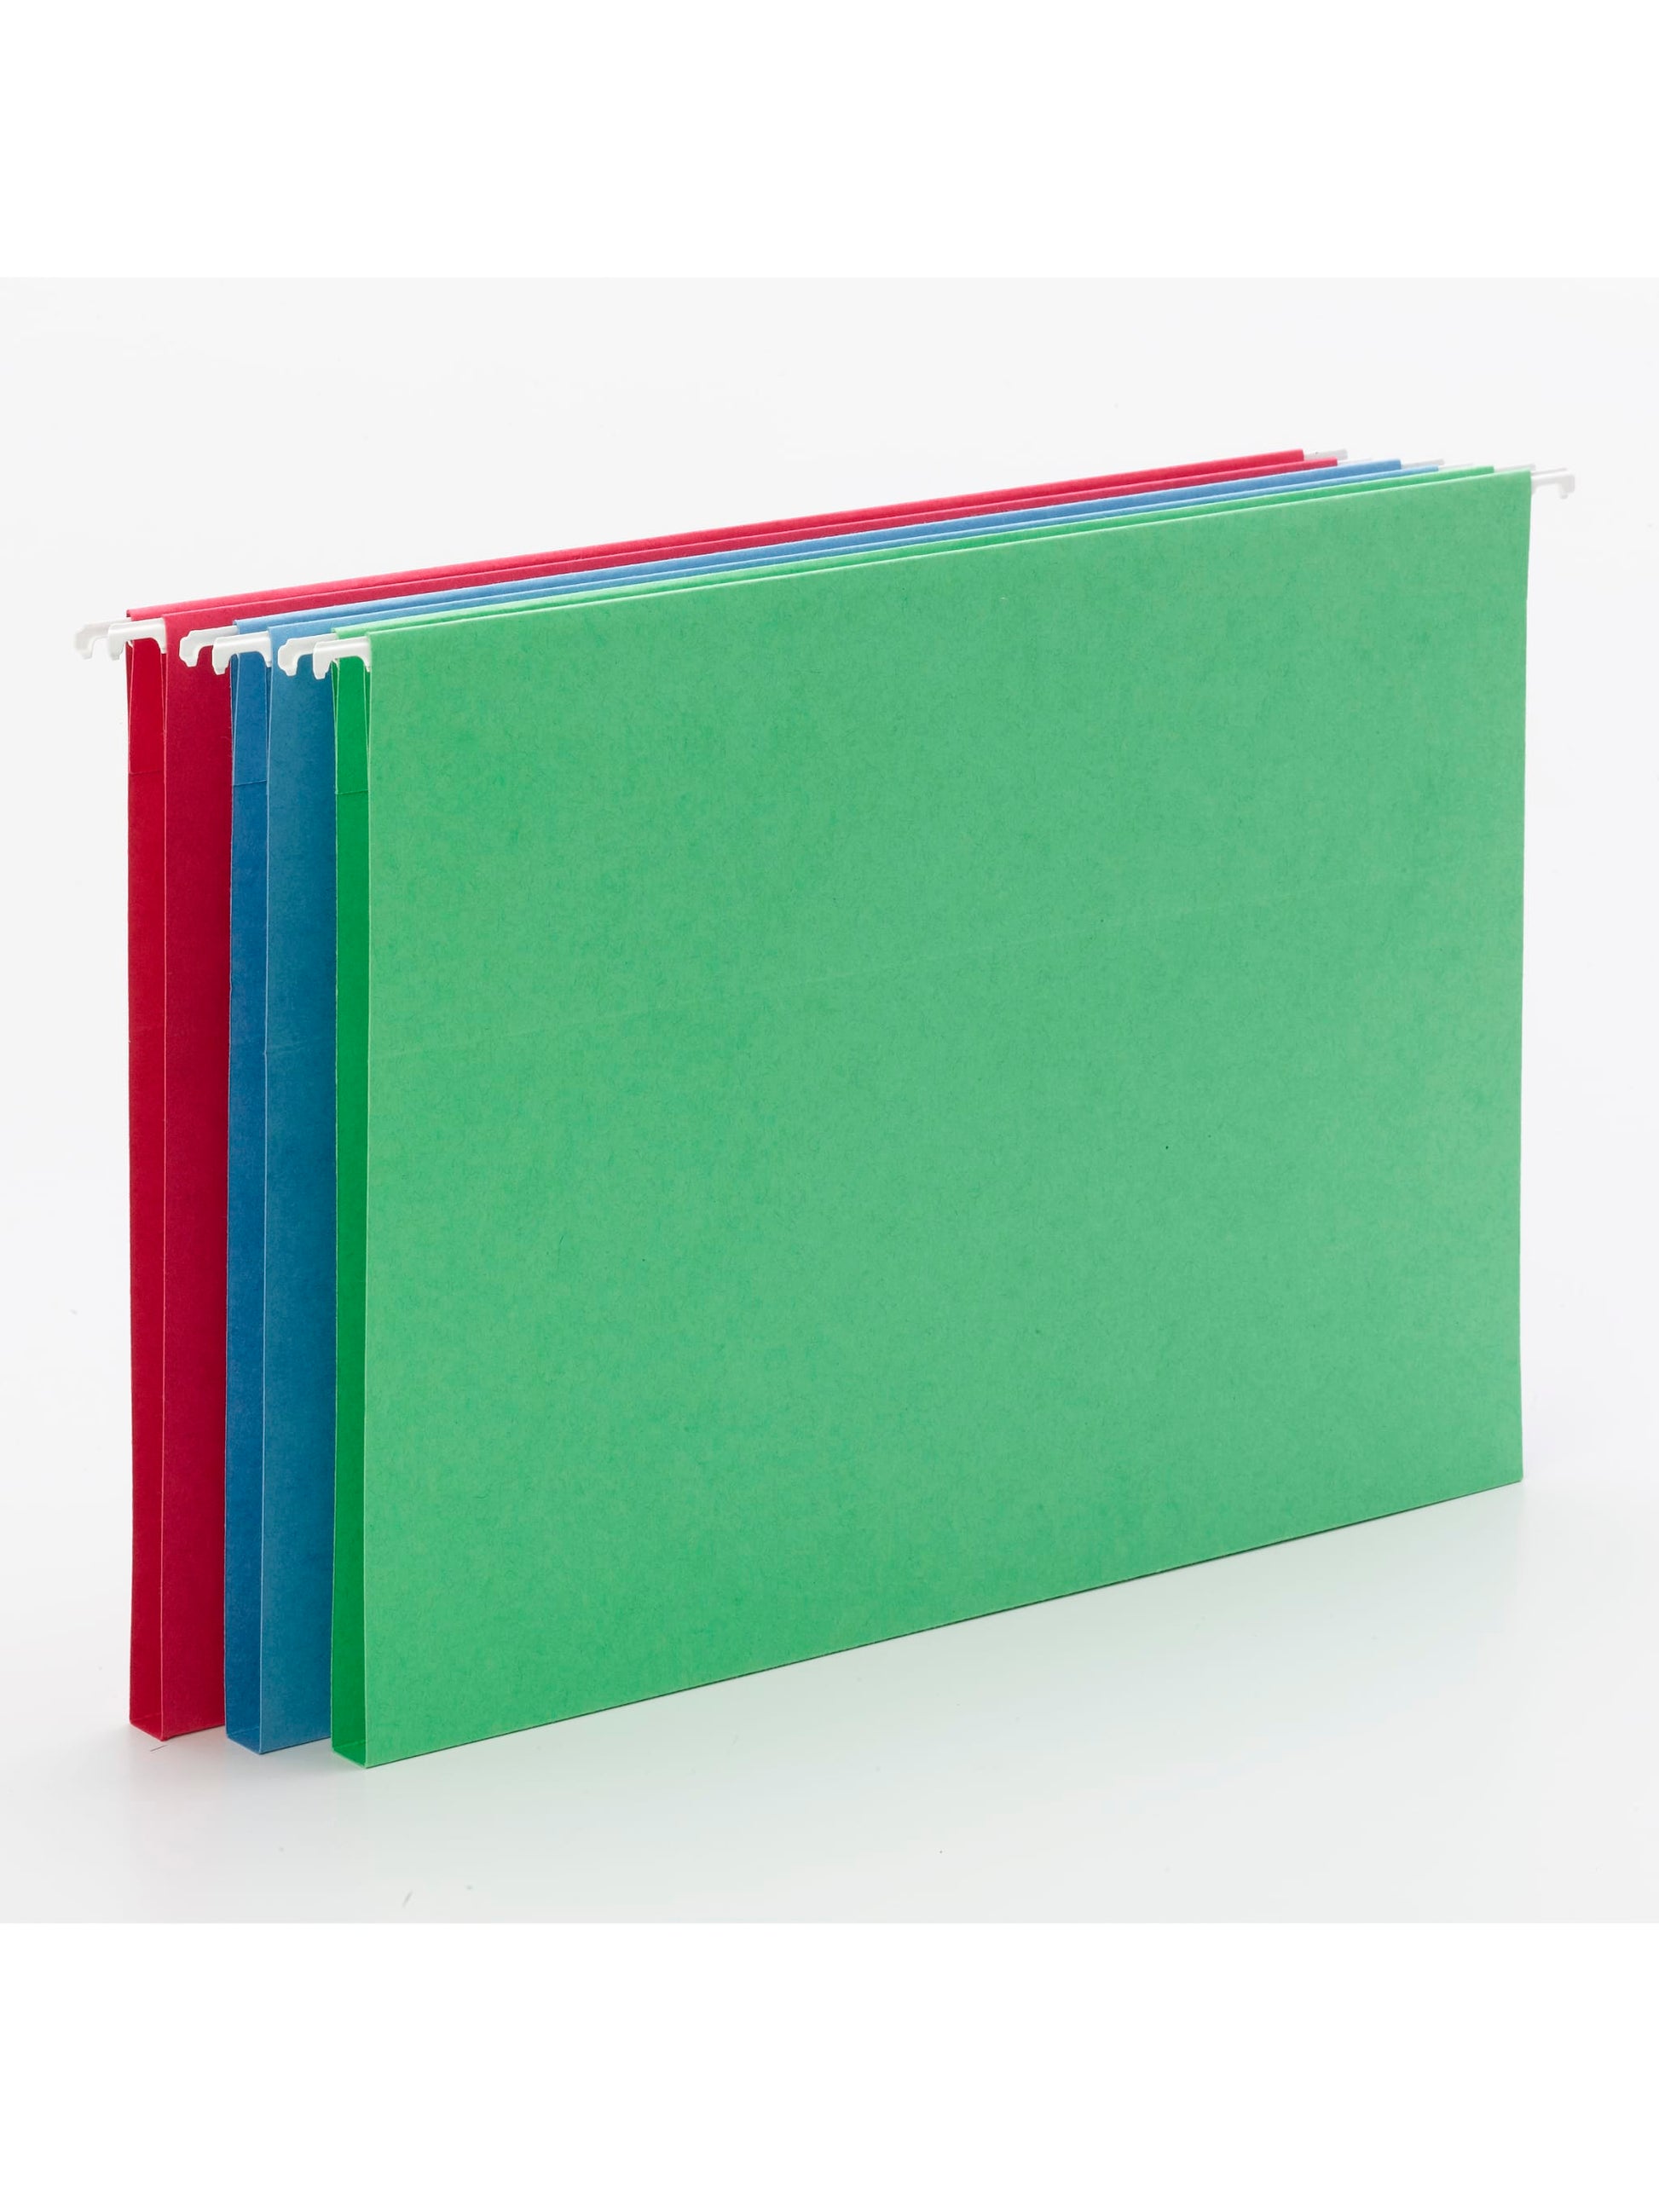 Reveal Hanging Folders with SuperTab® Folders Kit, Assorted Primaries Color, Letter Size, 086486920186